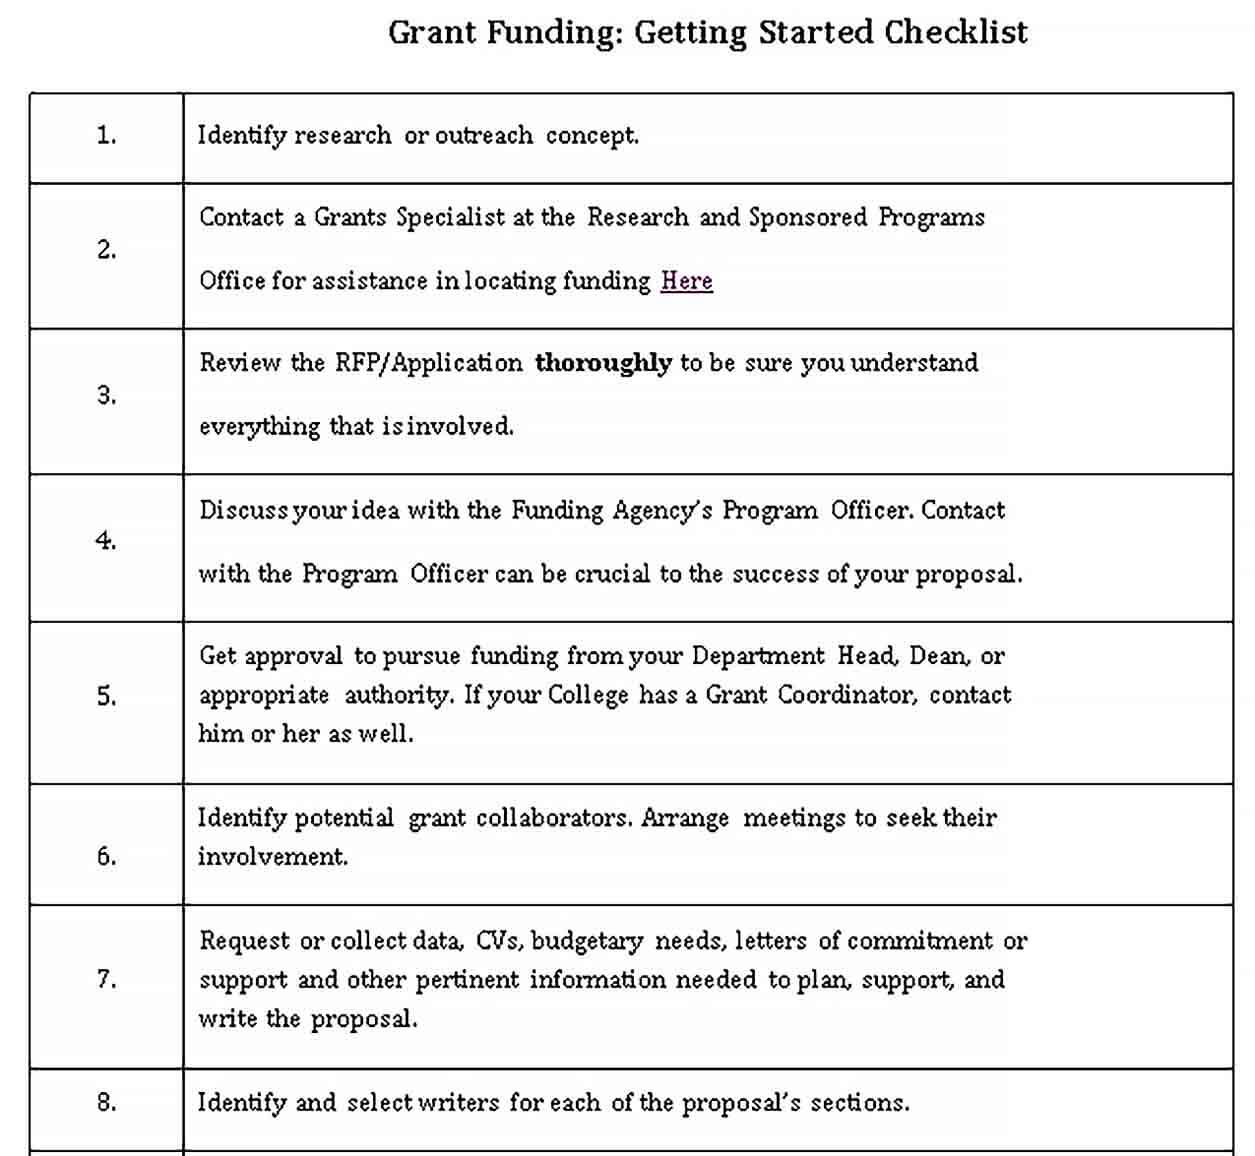 Sample Grant Content And Procedures Checklist Template